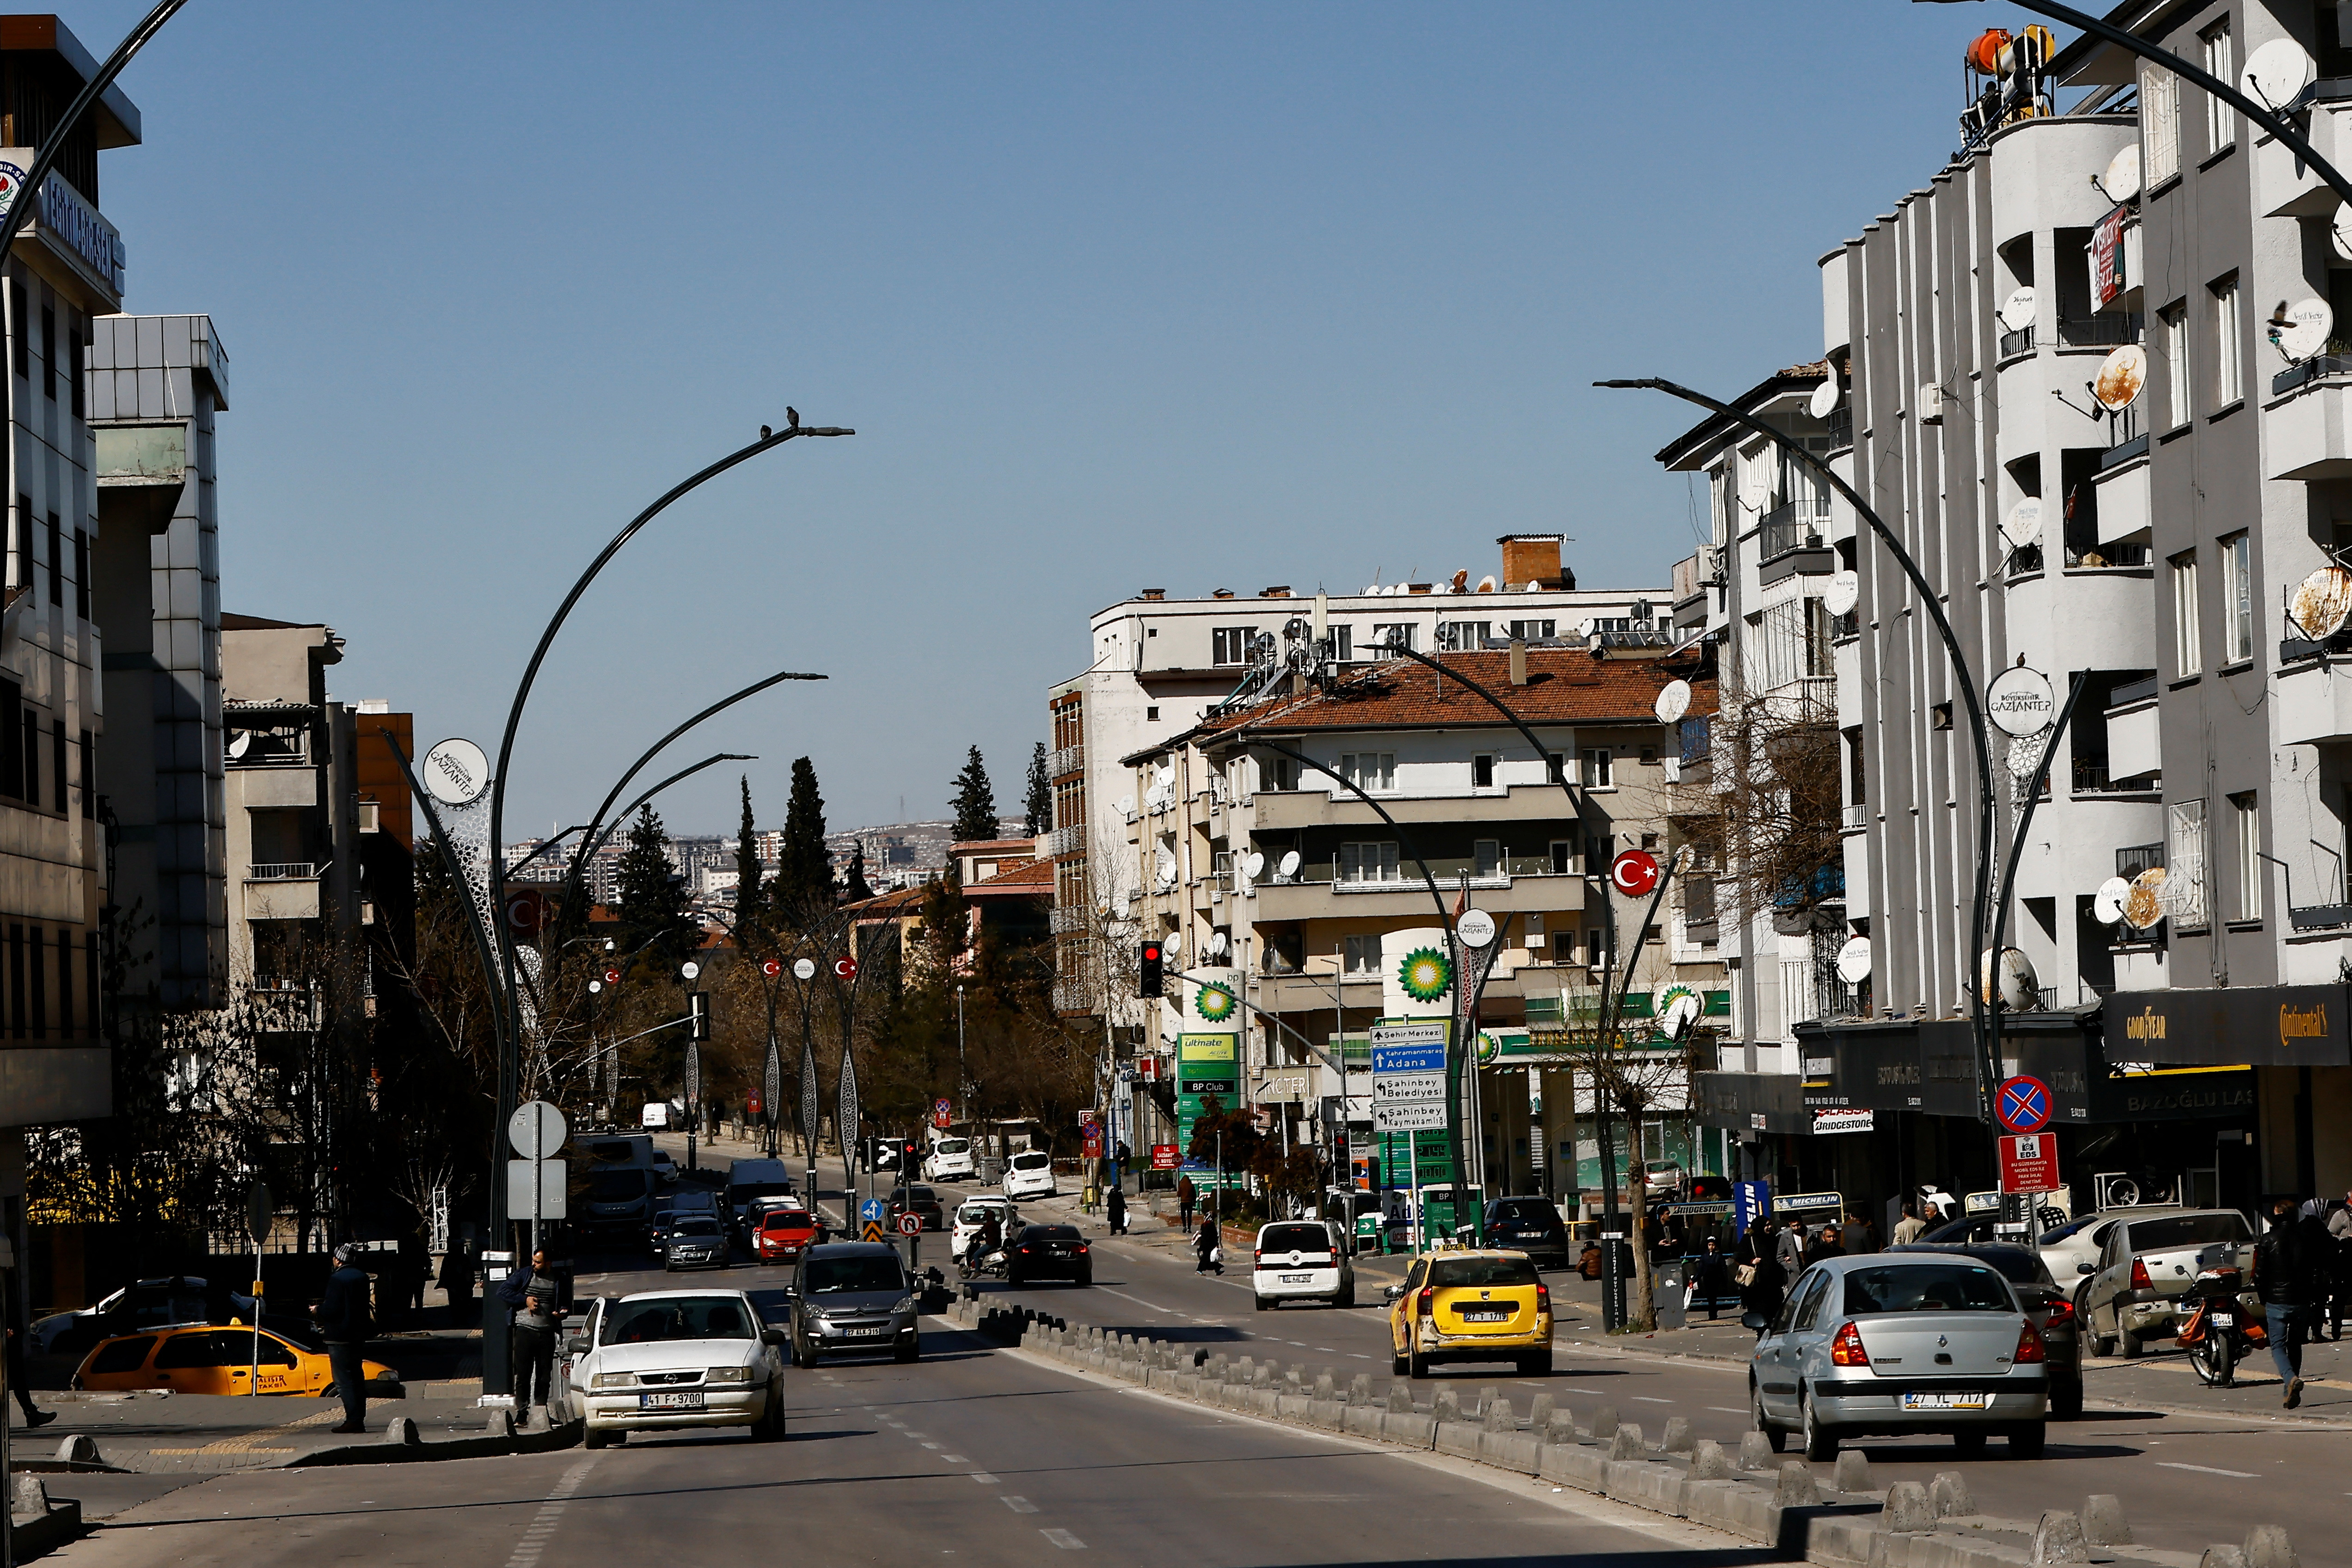 A view of a street in Gaziantep